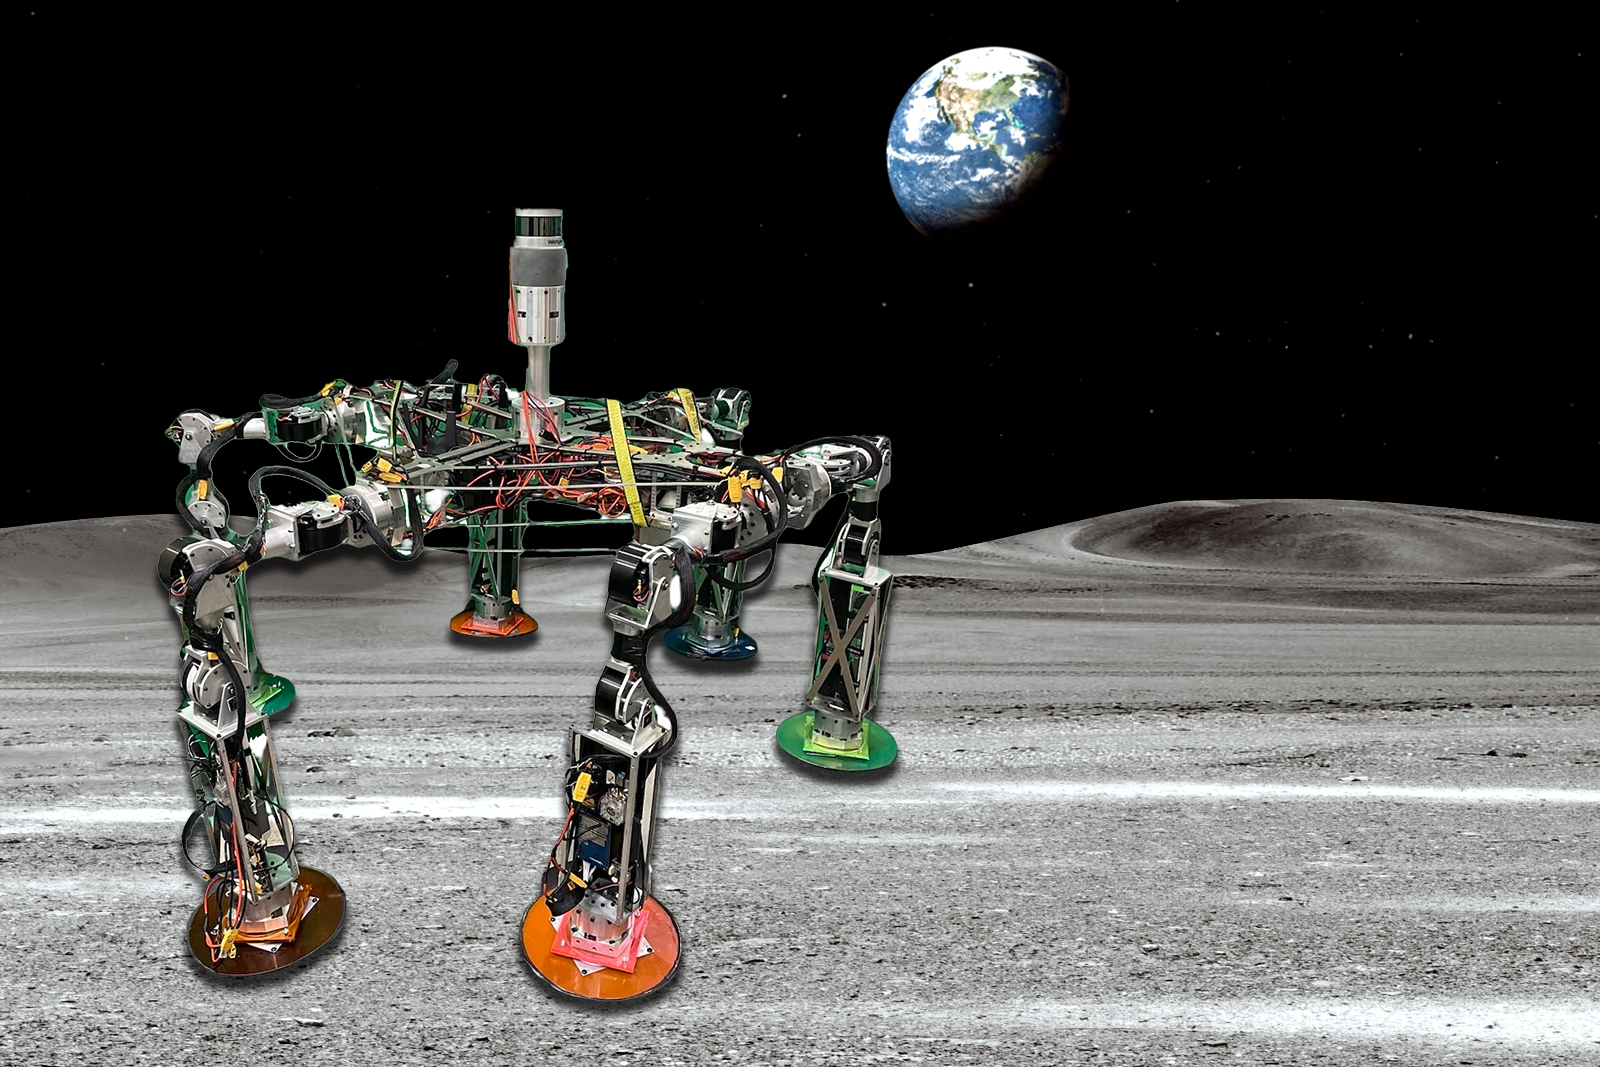 A team of MIT engineers is designing a kit of universal robotic parts that an astronaut could easily mix and match to build different robot “species” to fit various missions on the moon.